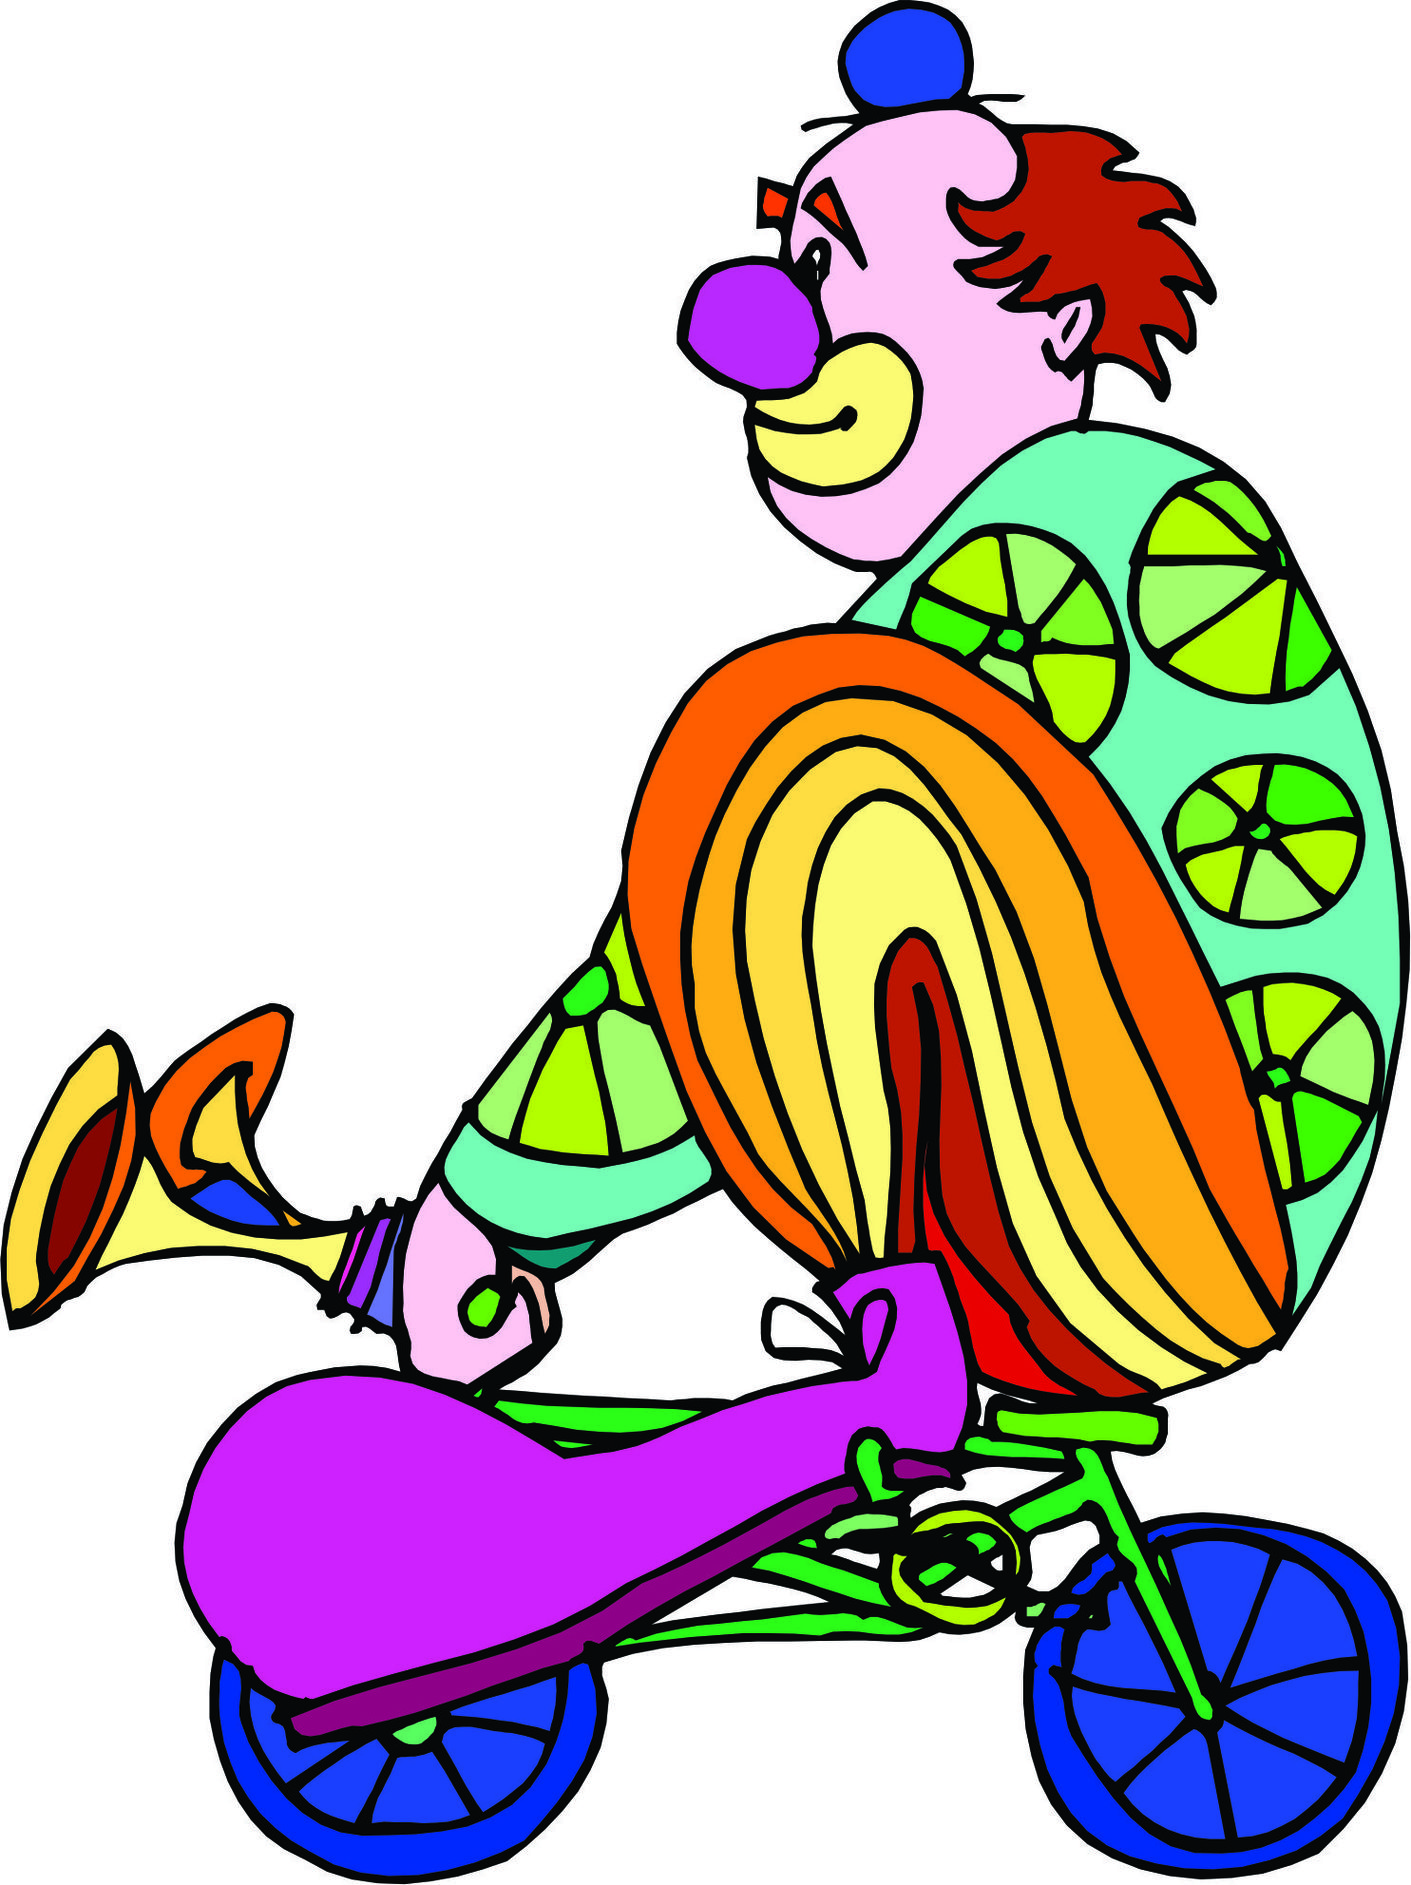 Clowns Cartoons Pictures Clipart - Free to use Clip Art Resource